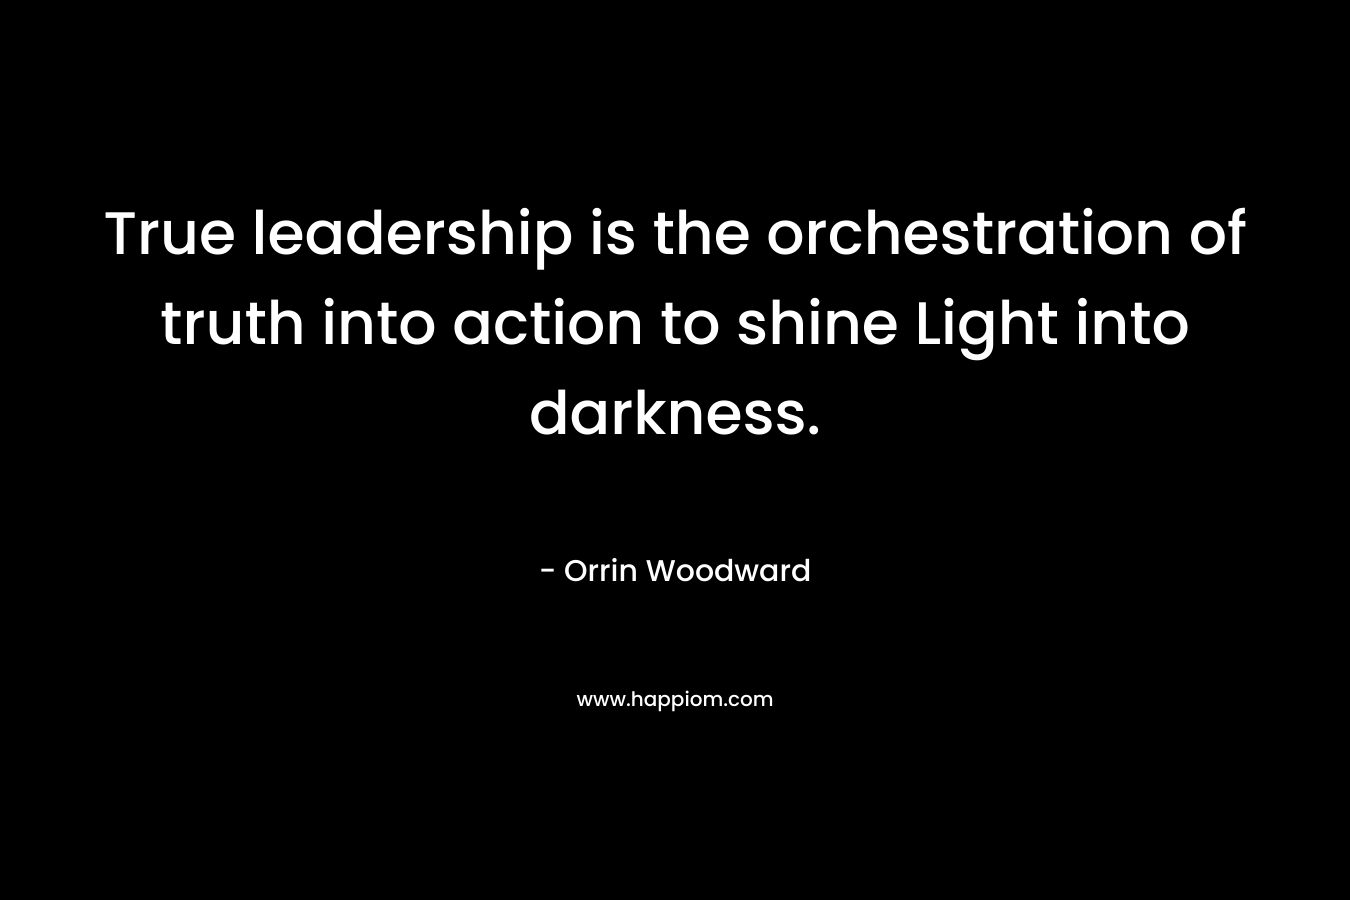 True leadership is the orchestration of truth into action to shine Light into darkness.